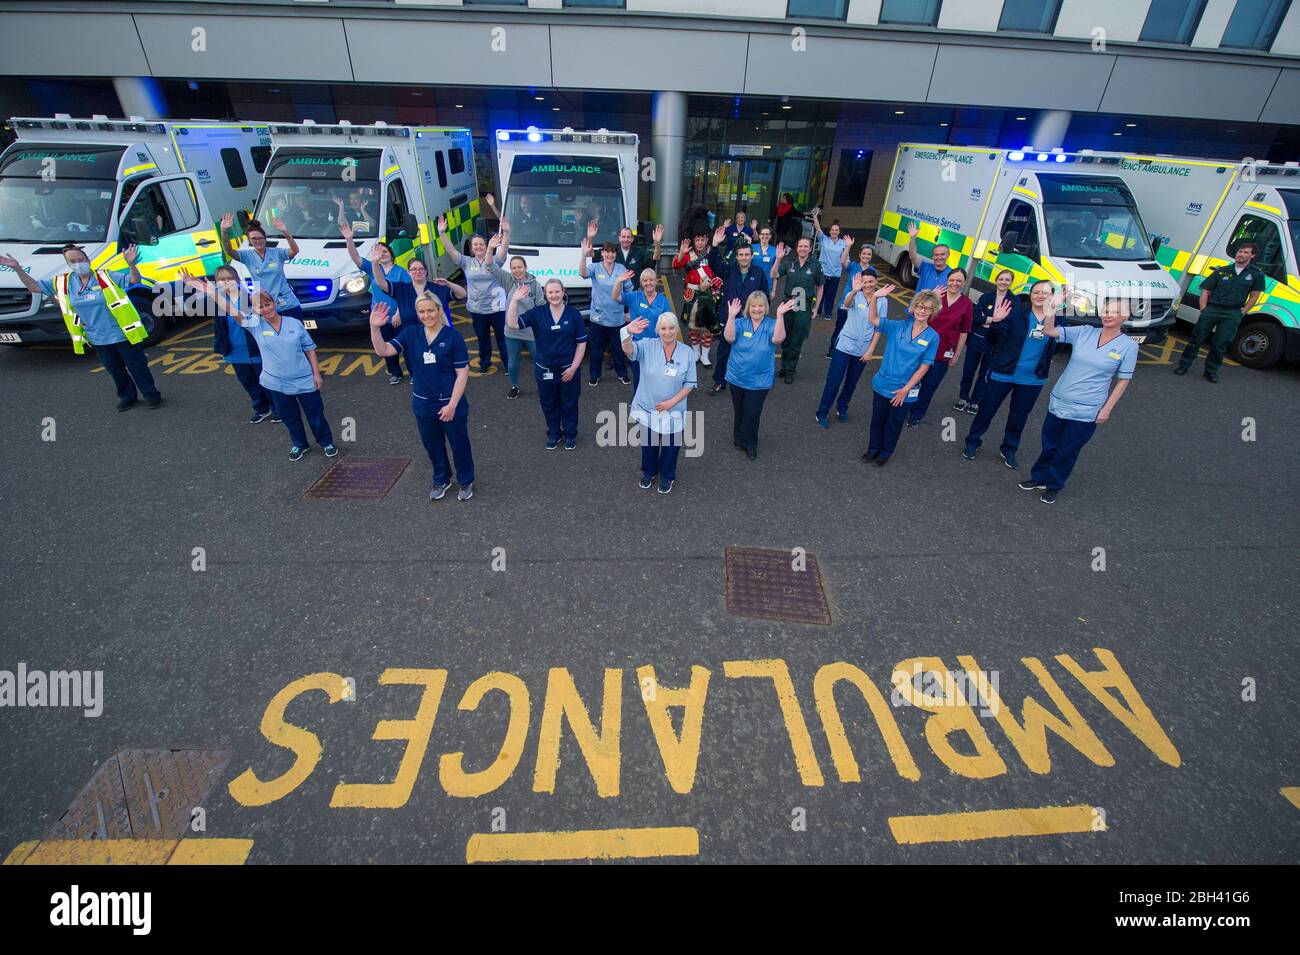 Glasgow, UK. 23rd Apr, 2020. Pictured: NHS staff and emergency workers show their appreciation during the 'Clap for Our Carers' campaign - a weekly tribute to thank NHS and key workers during thee coronavirus (COVID-19) outbreak. The public are being encouraged to applaud NHS staff and other key workers from their homes every Thursday at 8pm. To date the Coronavirus (COVID-19) pandemic has infected over 2.6 million people globally, and in the UK infected 138,078 and killed 18,738. Credit: Colin Fisher/Alamy Live News Stock Photo